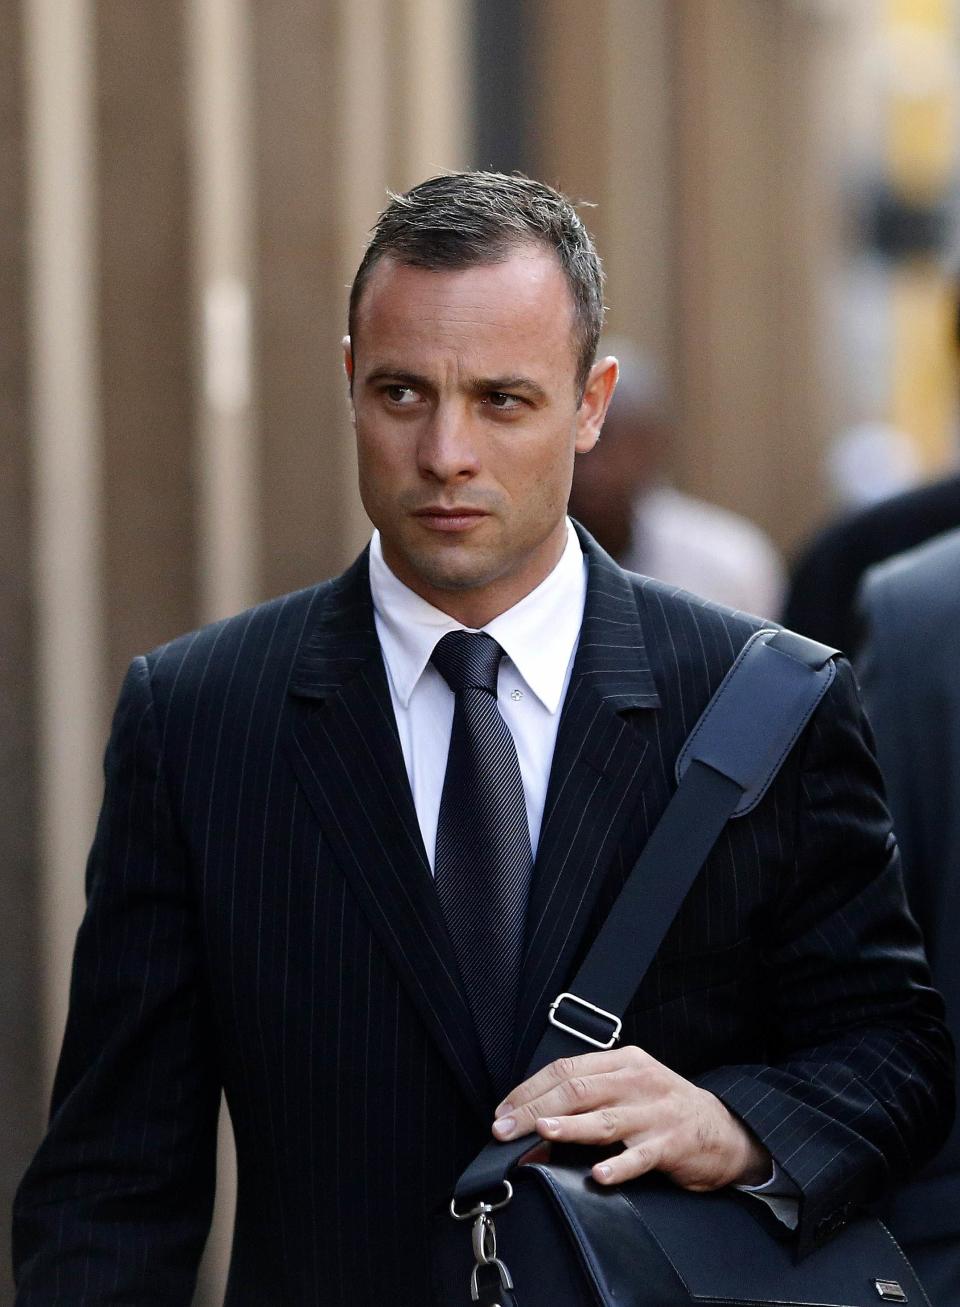 Olympic and Paralympic track star Oscar Pistorius arrives ahead of his trial for the murder of his girlfriend Reeva Steenkamp at the North Gauteng High Court in Pretoria, March 18, 2014. Pistorius is on trial for murdering his girlfriend Reeva Steenkamp at his suburban Pretoria home on Valentine's Day last year. He says he mistook her for an intruder. REUTERS/Siphiwe Sibeko (SOUTH AFRICA - Tags: CRIME LAW SPORT ATHLETICS)